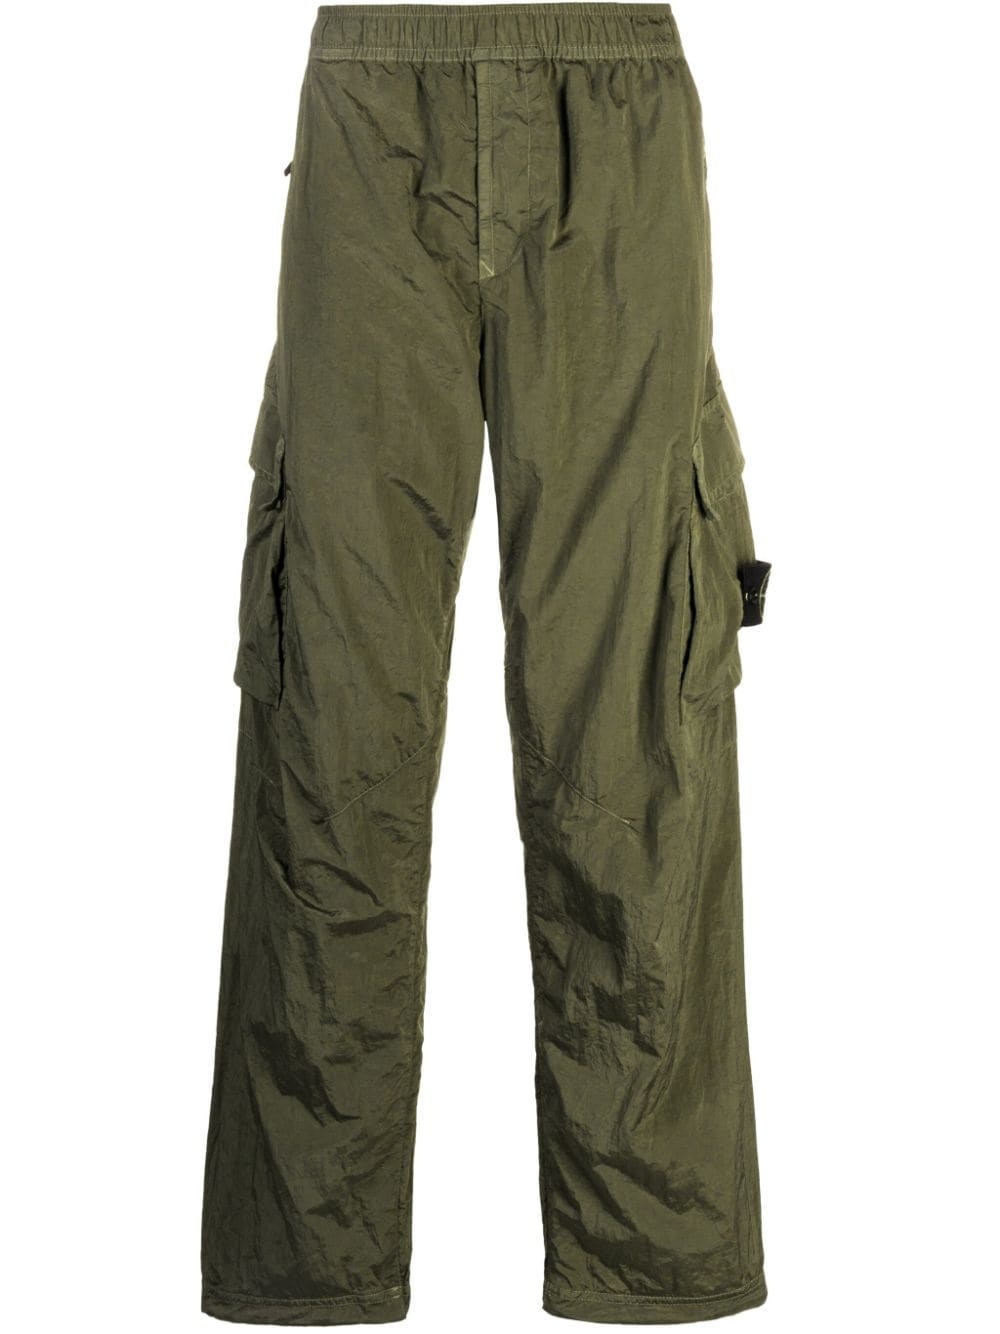 Compass-motif crinkled cargo trousers - 1